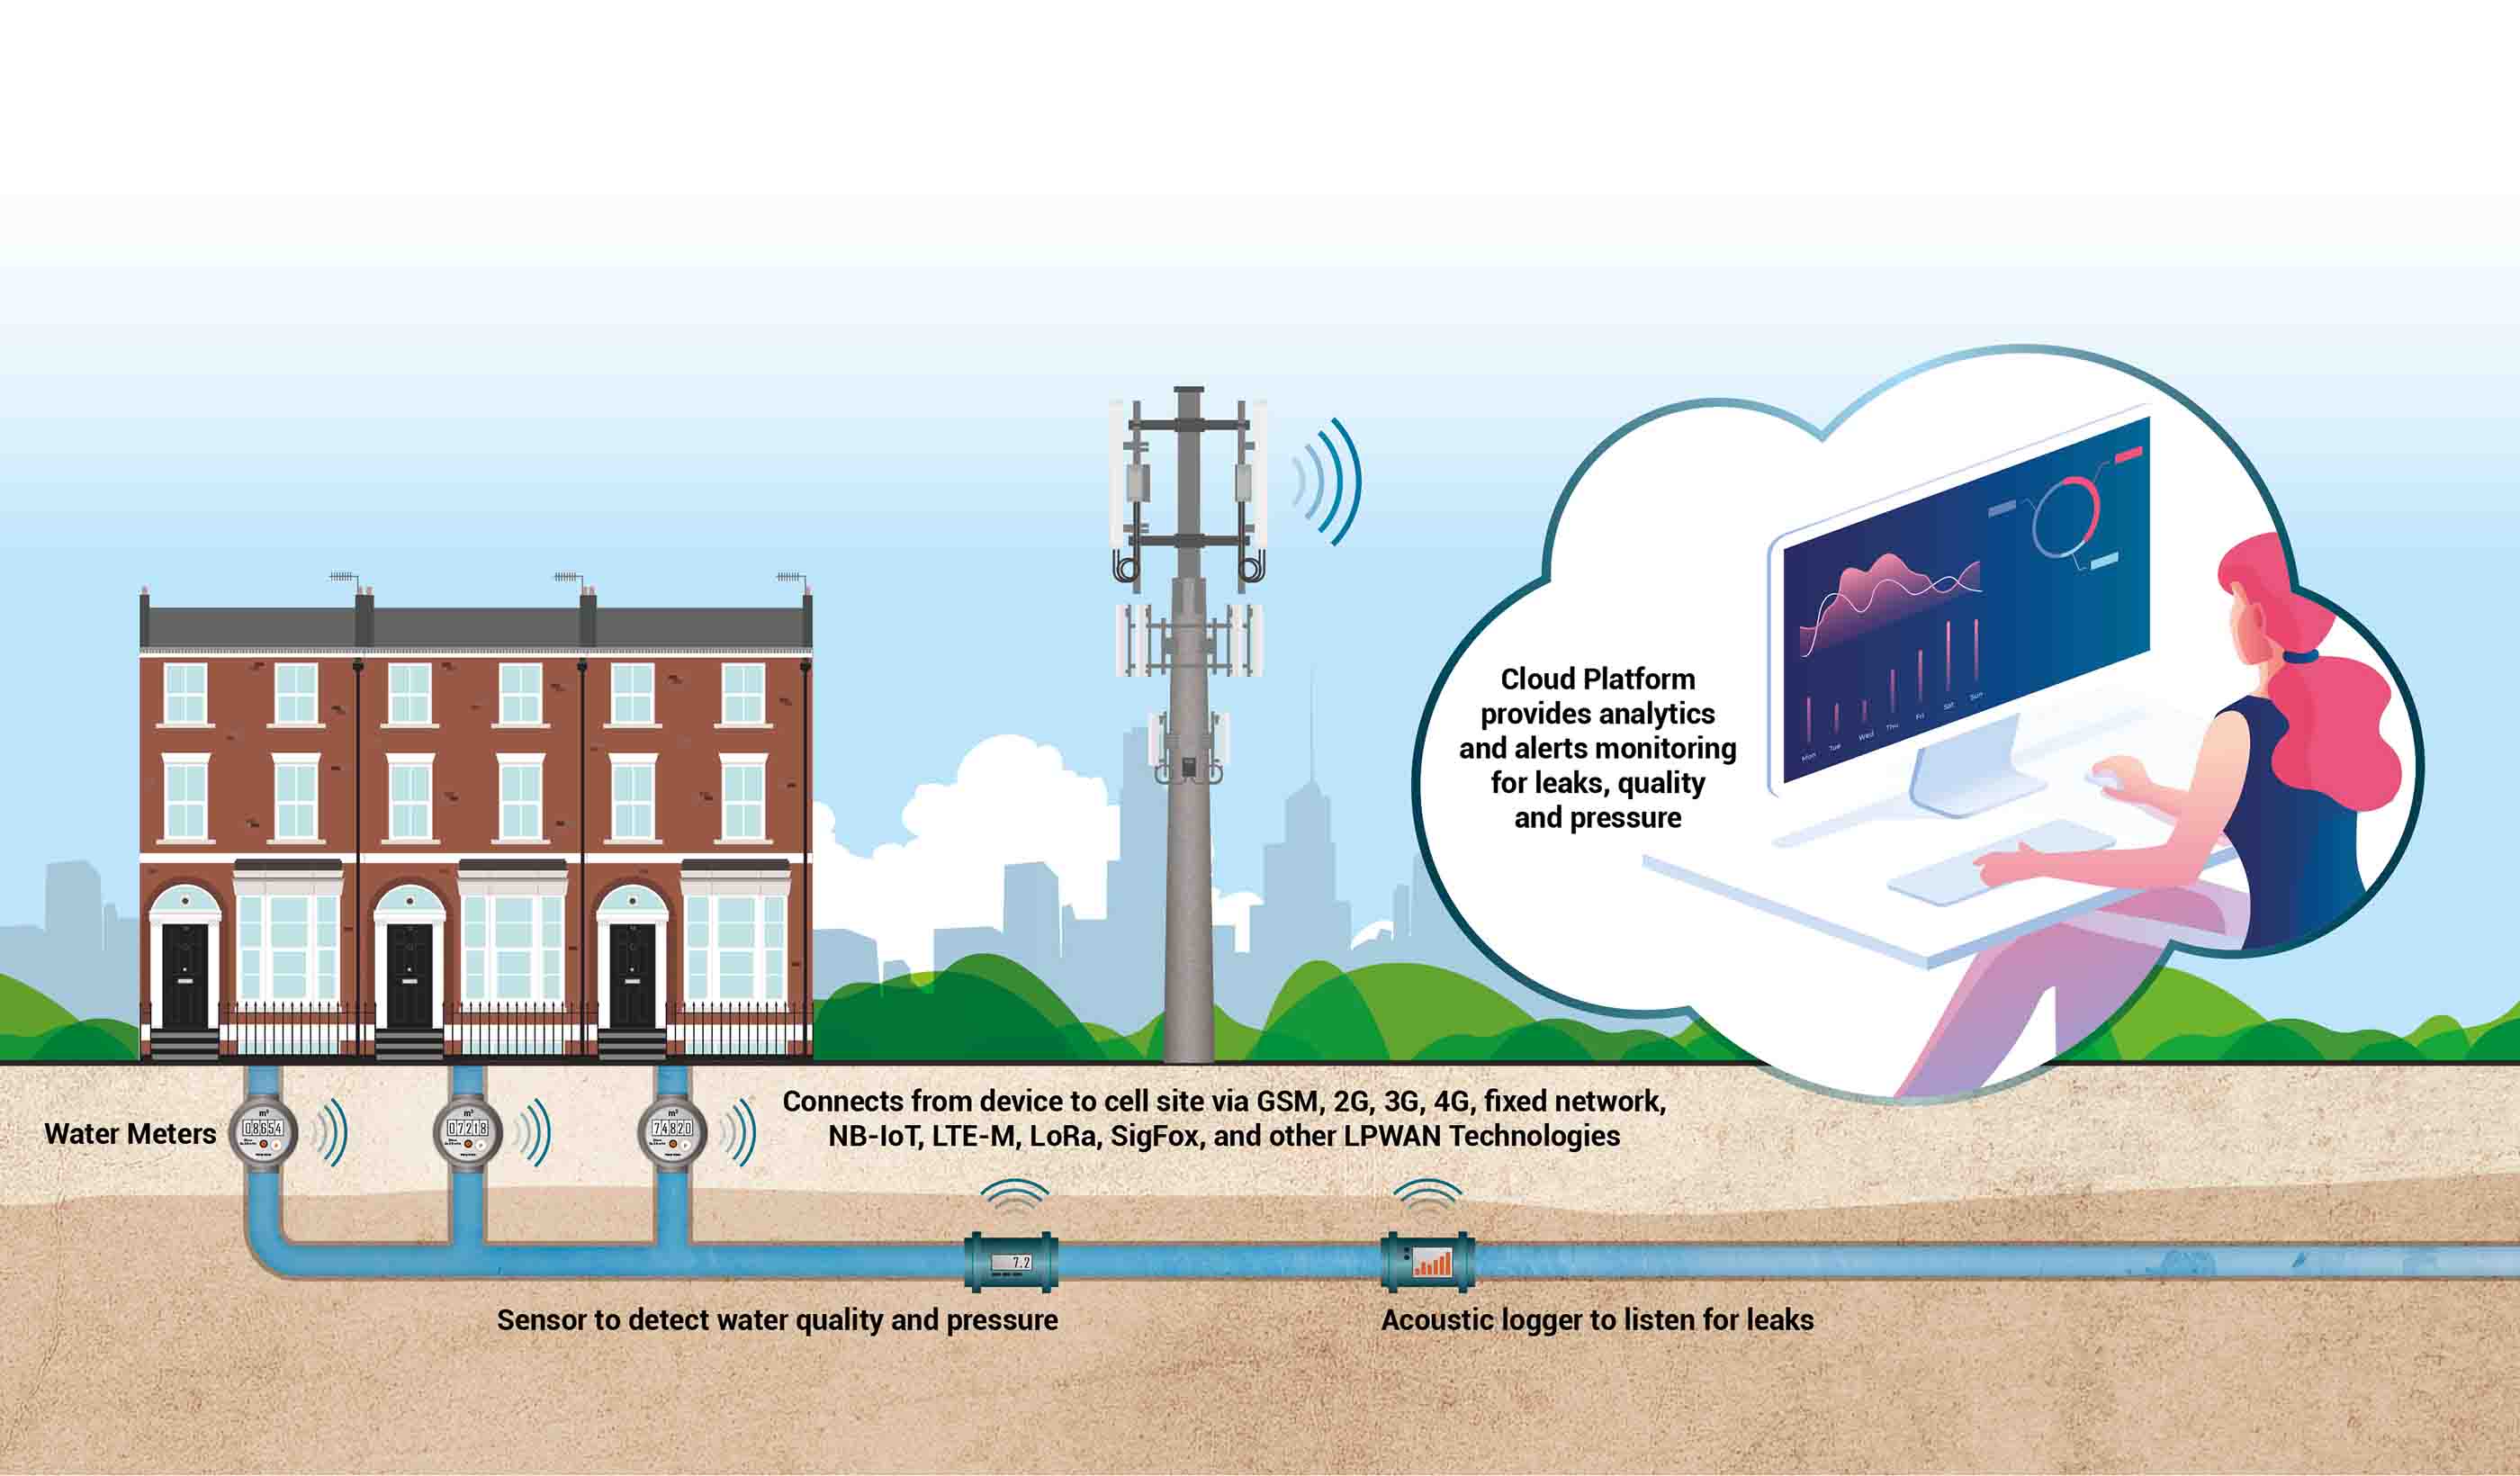 Adopting smart water network solutions across the UK water industry